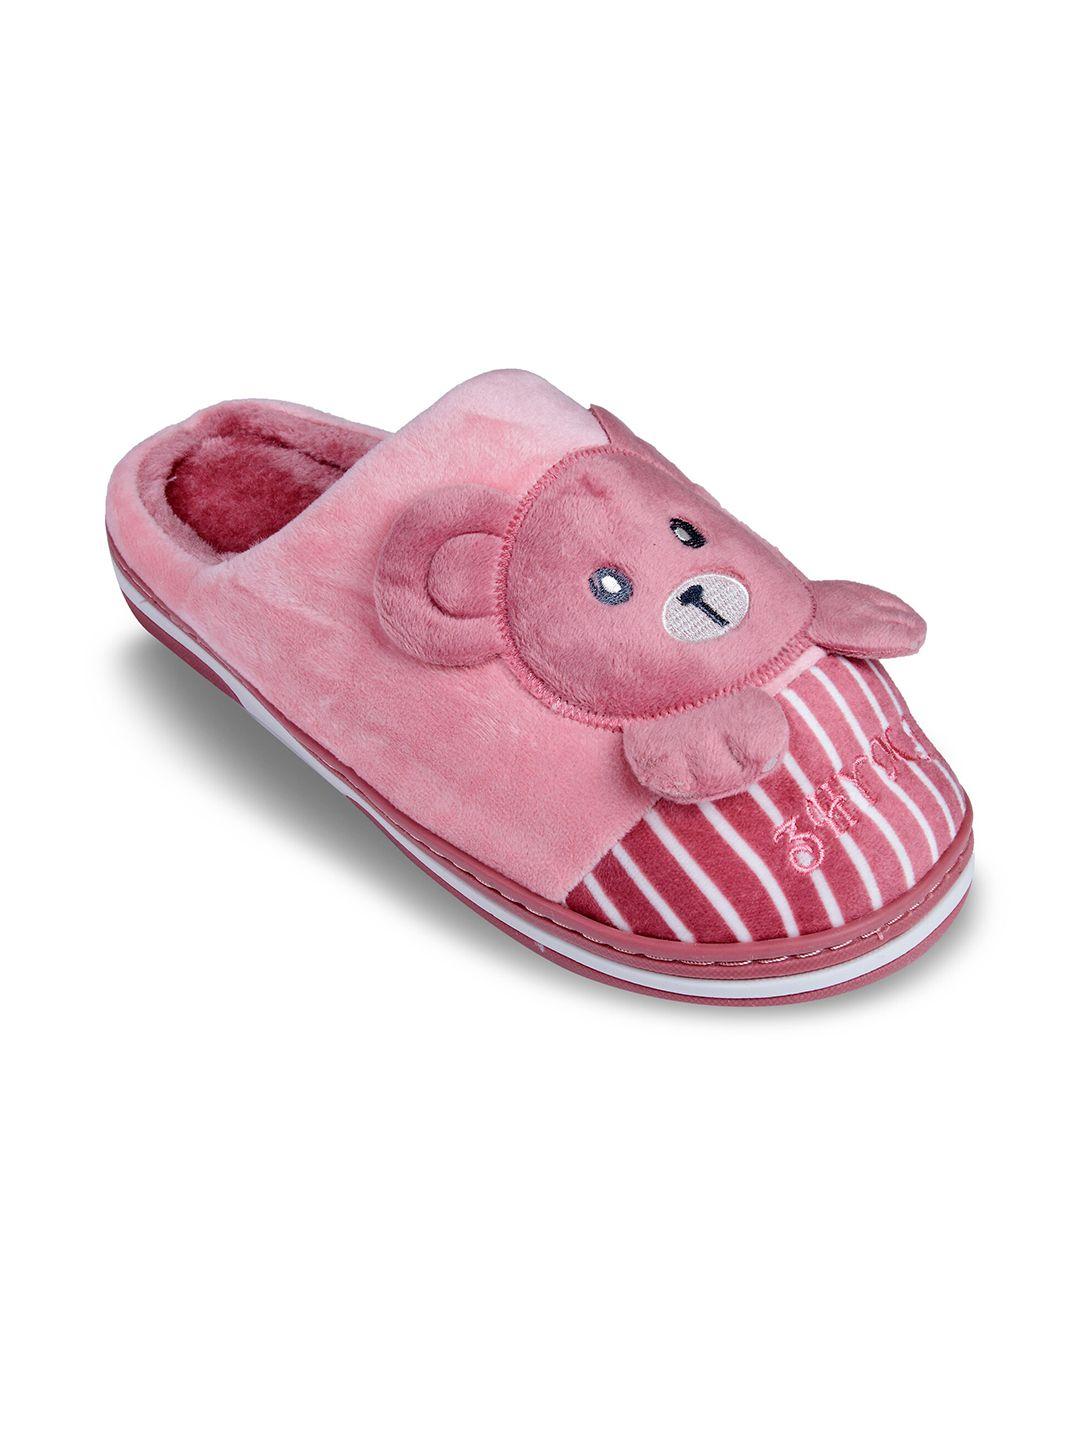 cassiey women peach-coloured & white striped room slippers